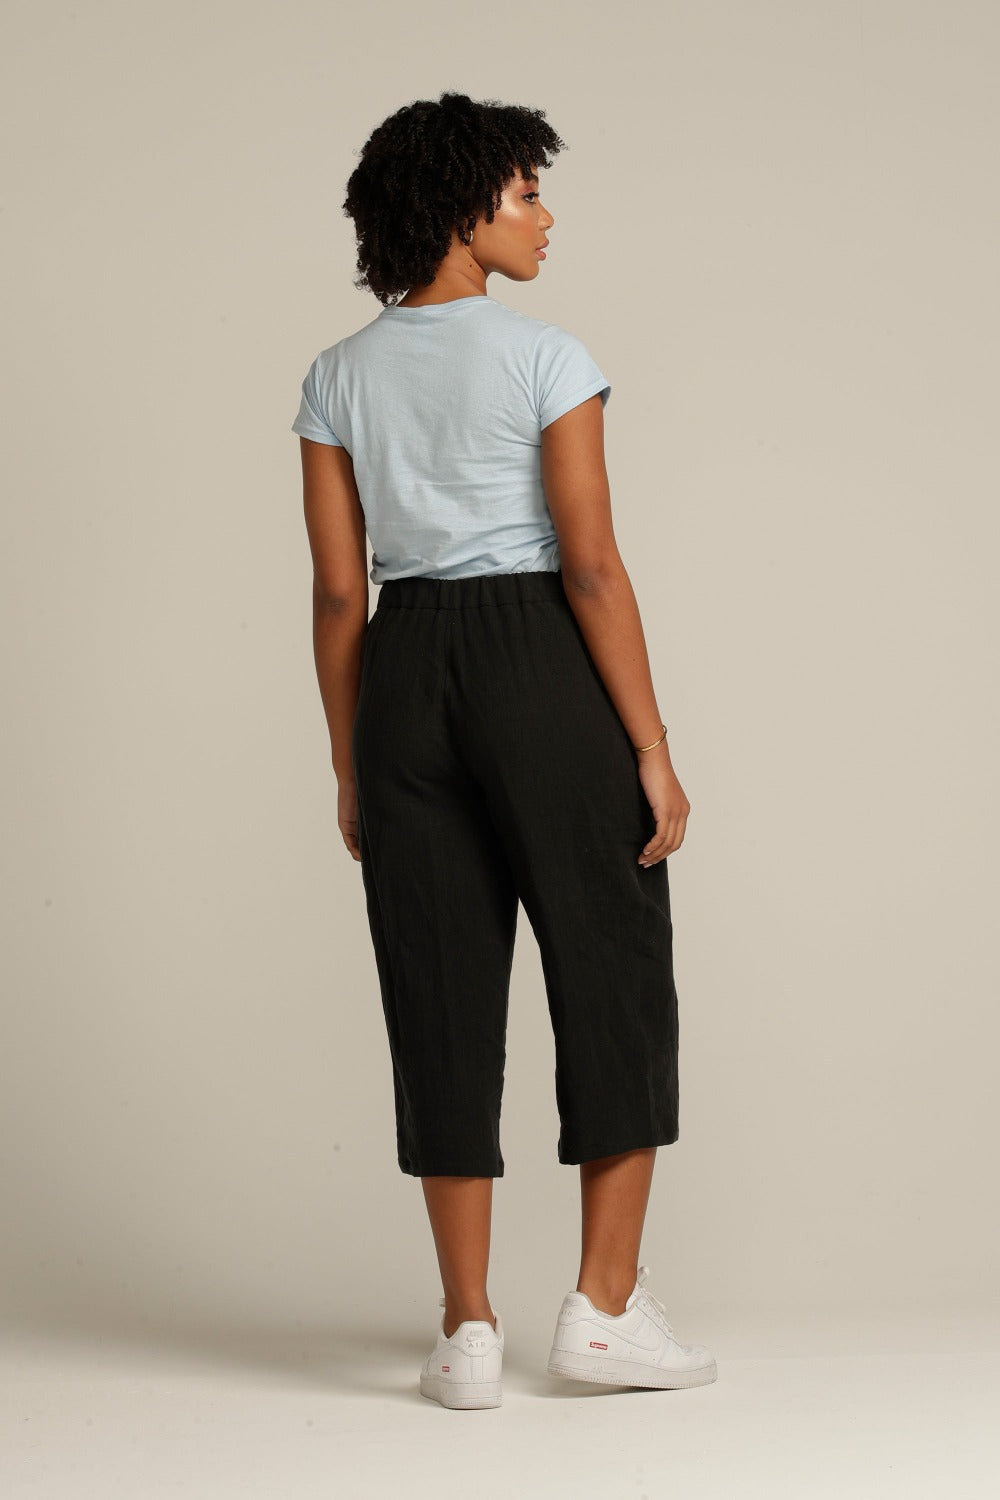 Back view of a curly haired woman wearing black linen culottes